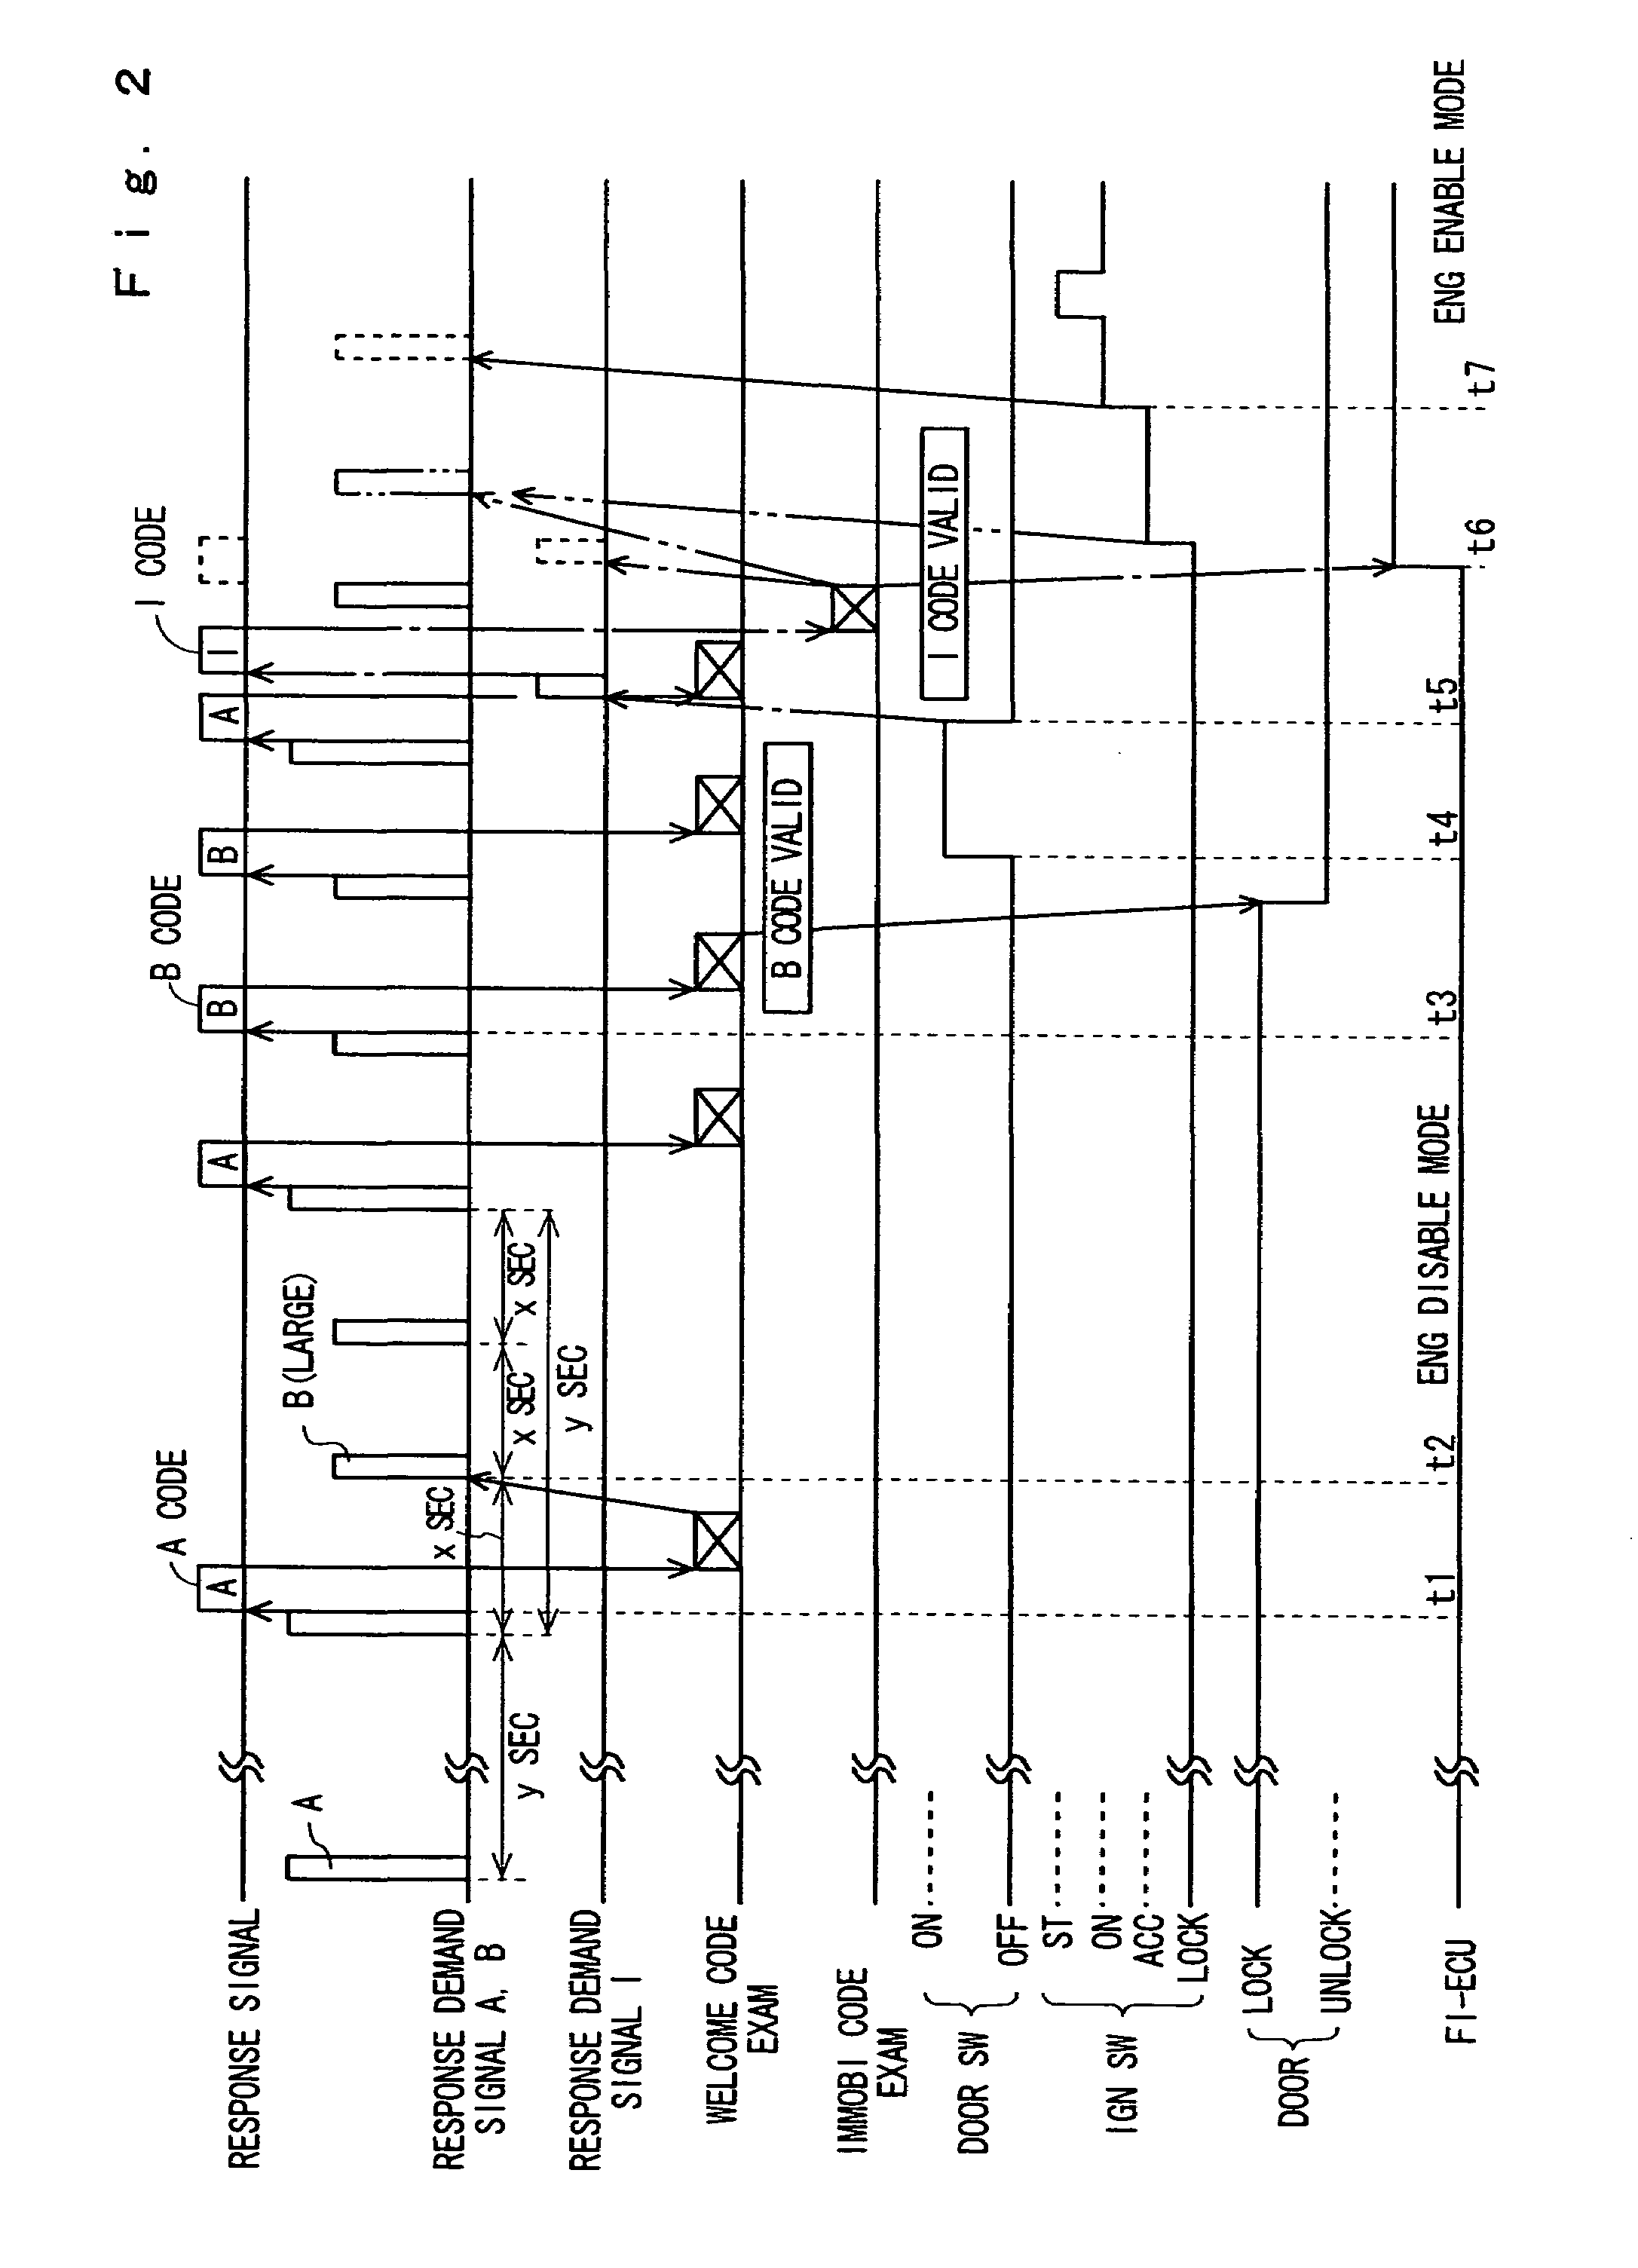 Remote control system for a vehicle